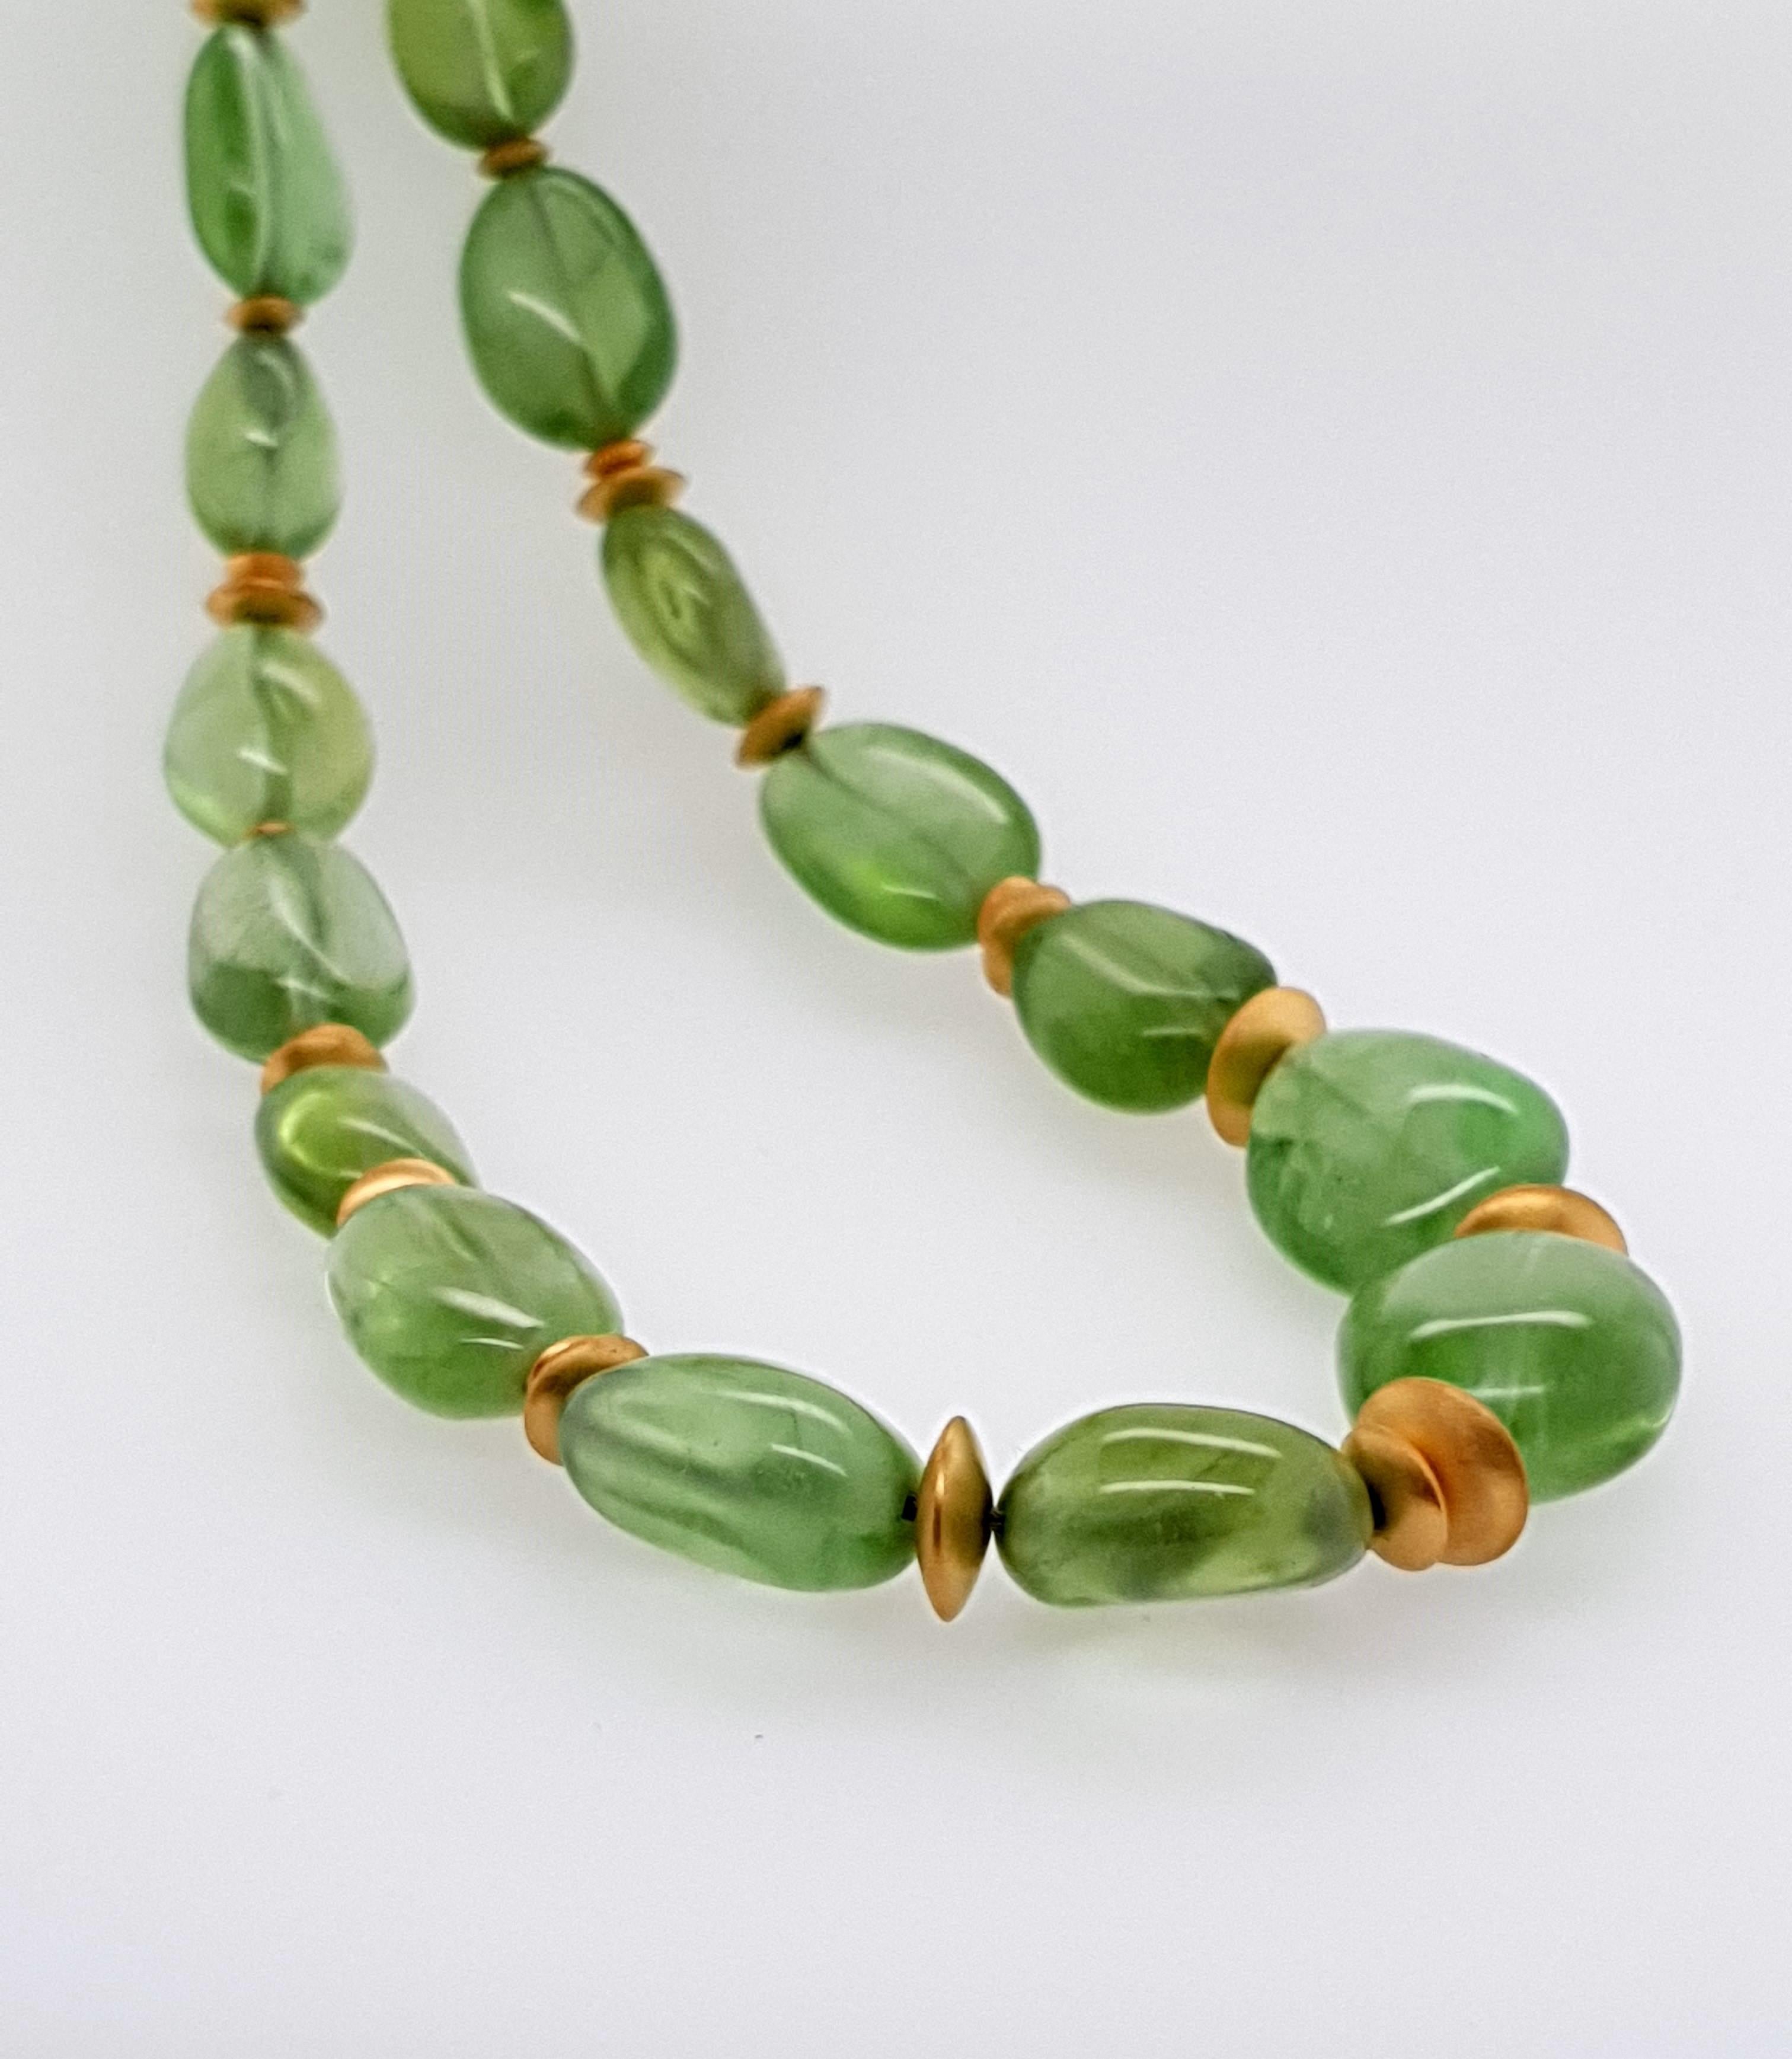 This Green Peridot Baroque Beaded Necklace with 18 Carat mat yellow Gold is totally handmade. Cutting as well as goldwork are made in German quality. The screw clasp is easy to handle and very secure.
Timeless and classic design combined with nice